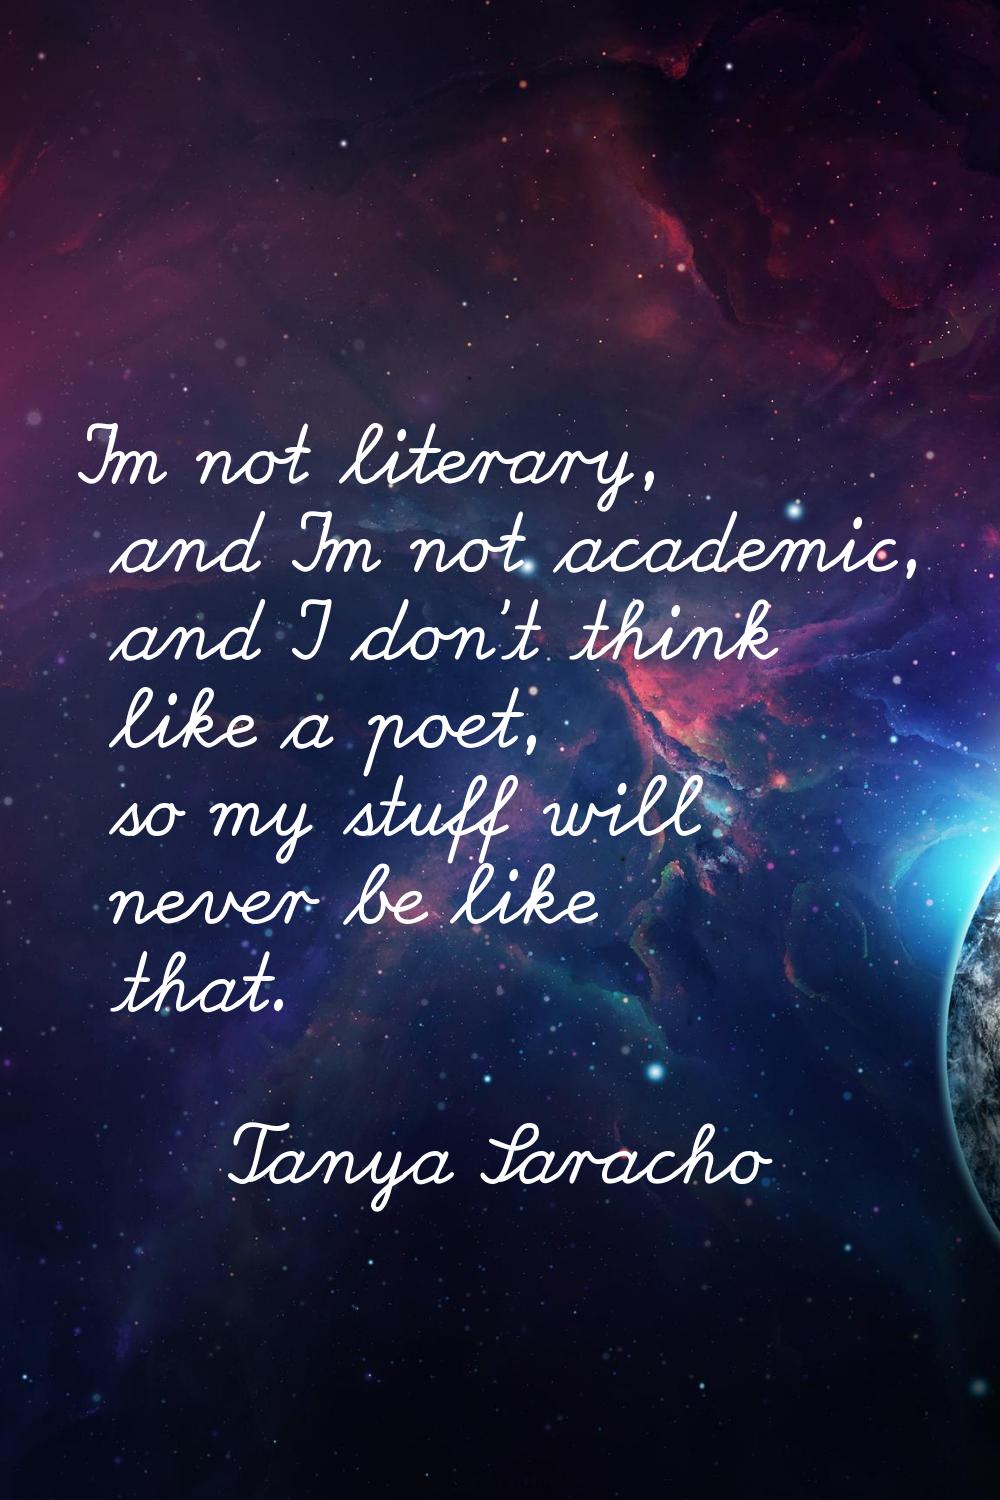 I'm not literary, and I'm not academic, and I don't think like a poet, so my stuff will never be li